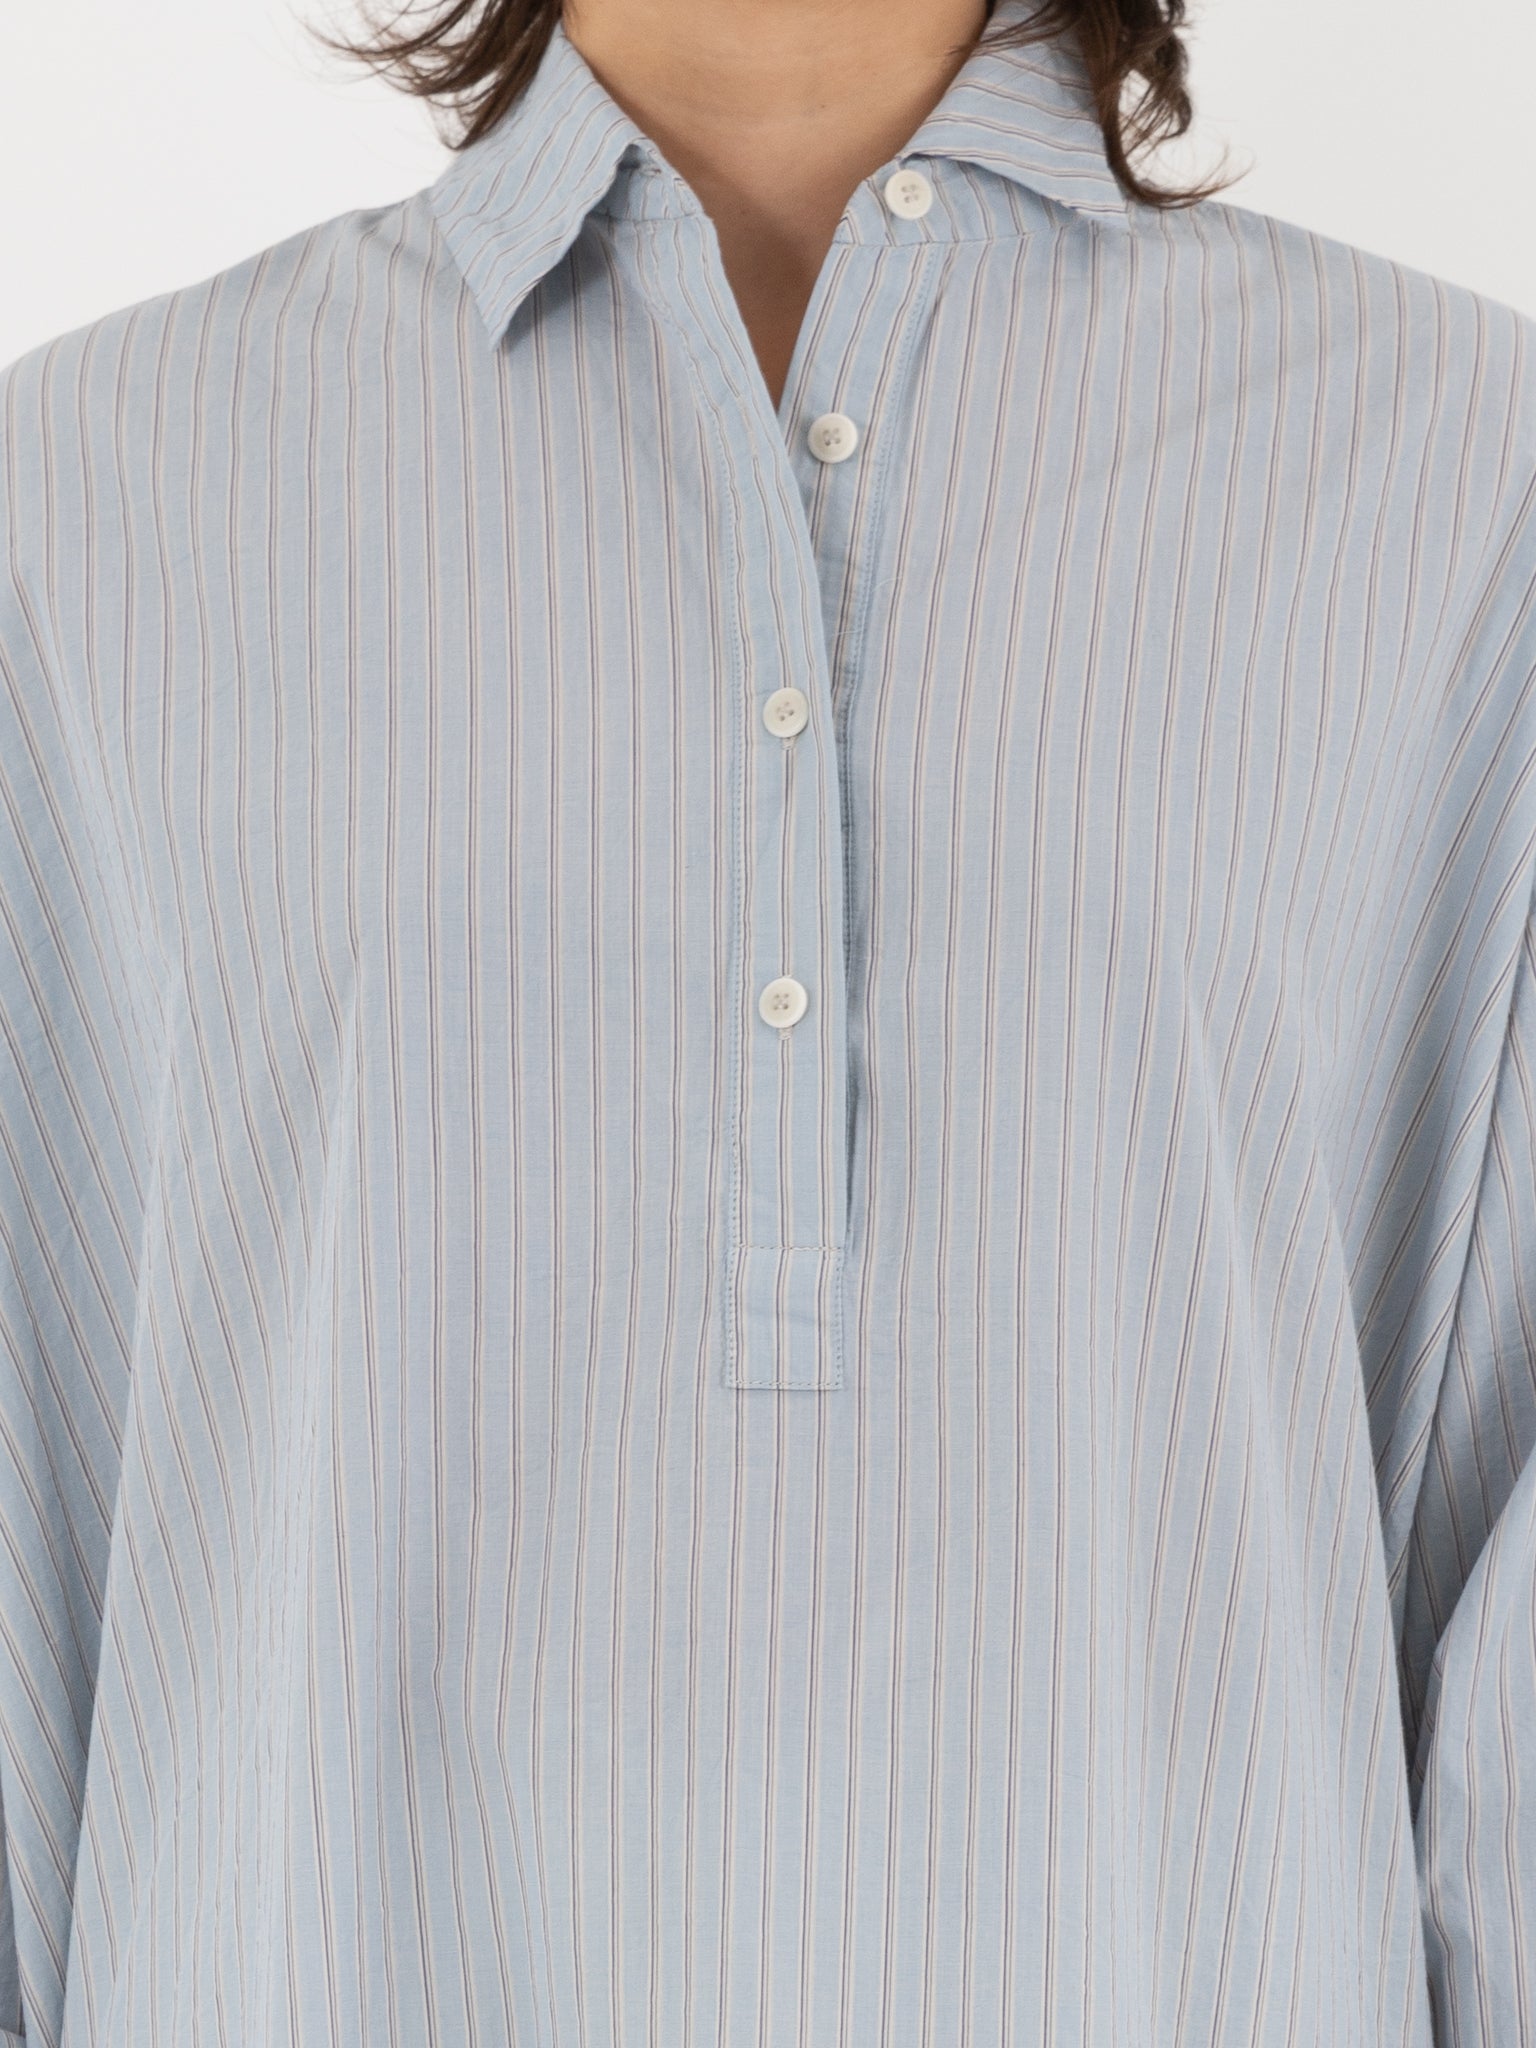 Casey Casey Tippy Top, Blue Stripe - Worthwhile, Inc.